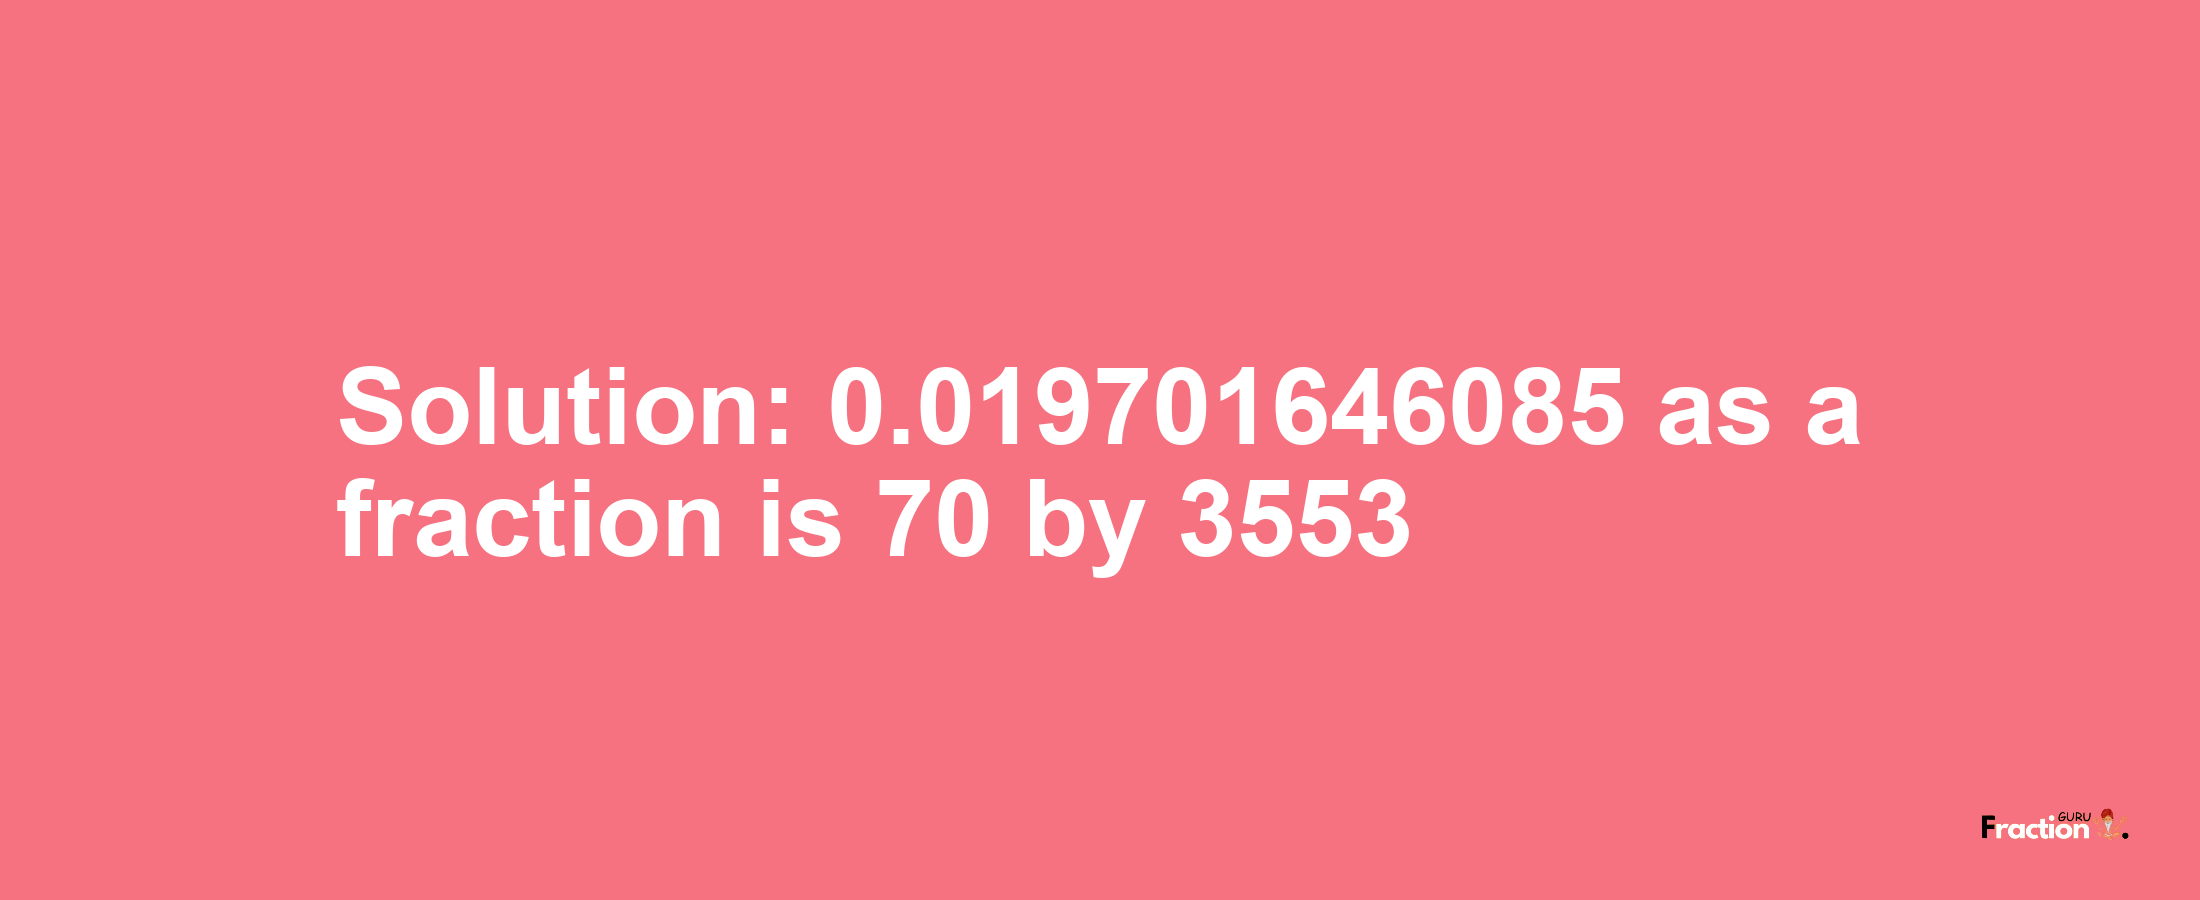 Solution:0.019701646085 as a fraction is 70/3553